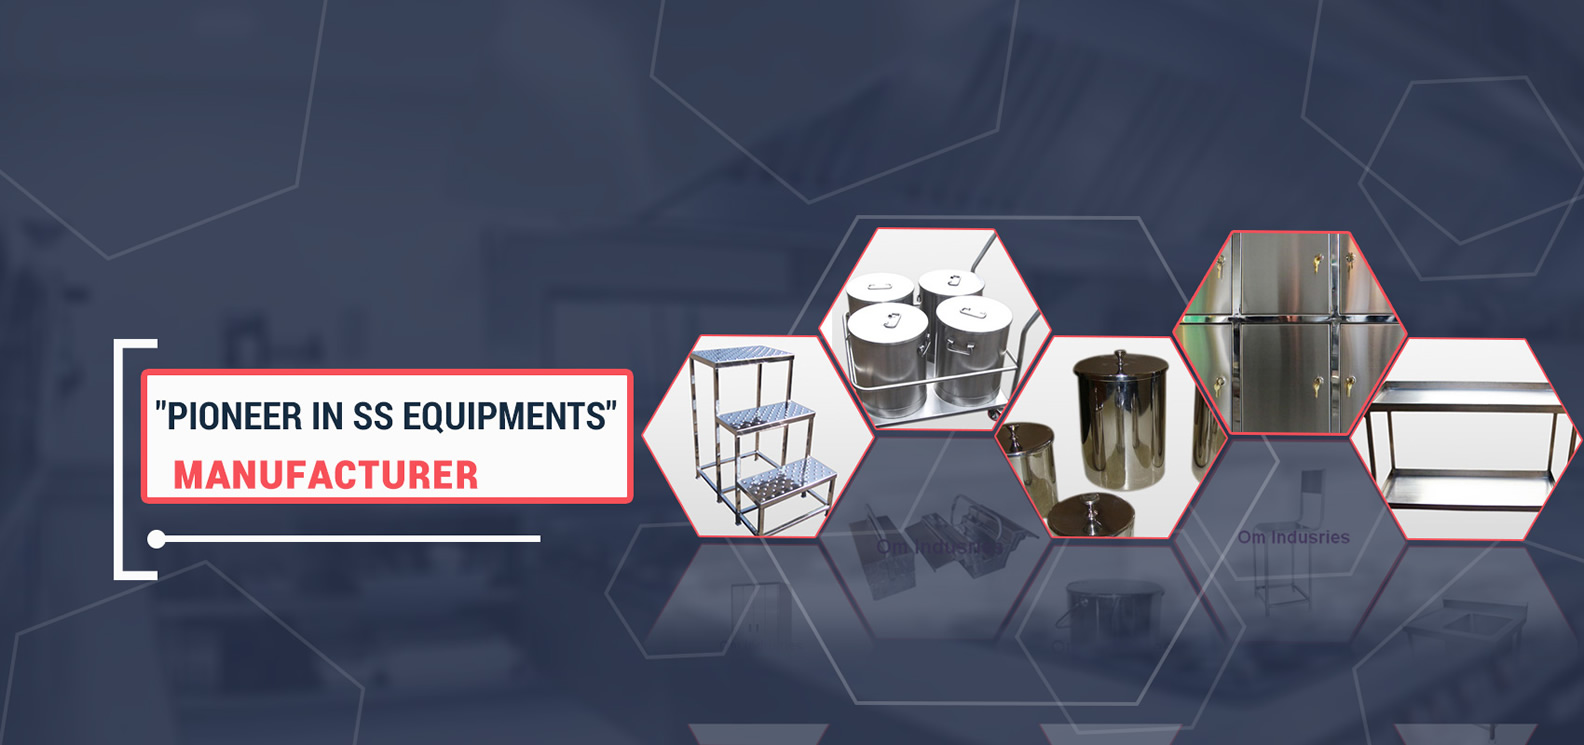 SS Equipments Manufacturer in Algiers